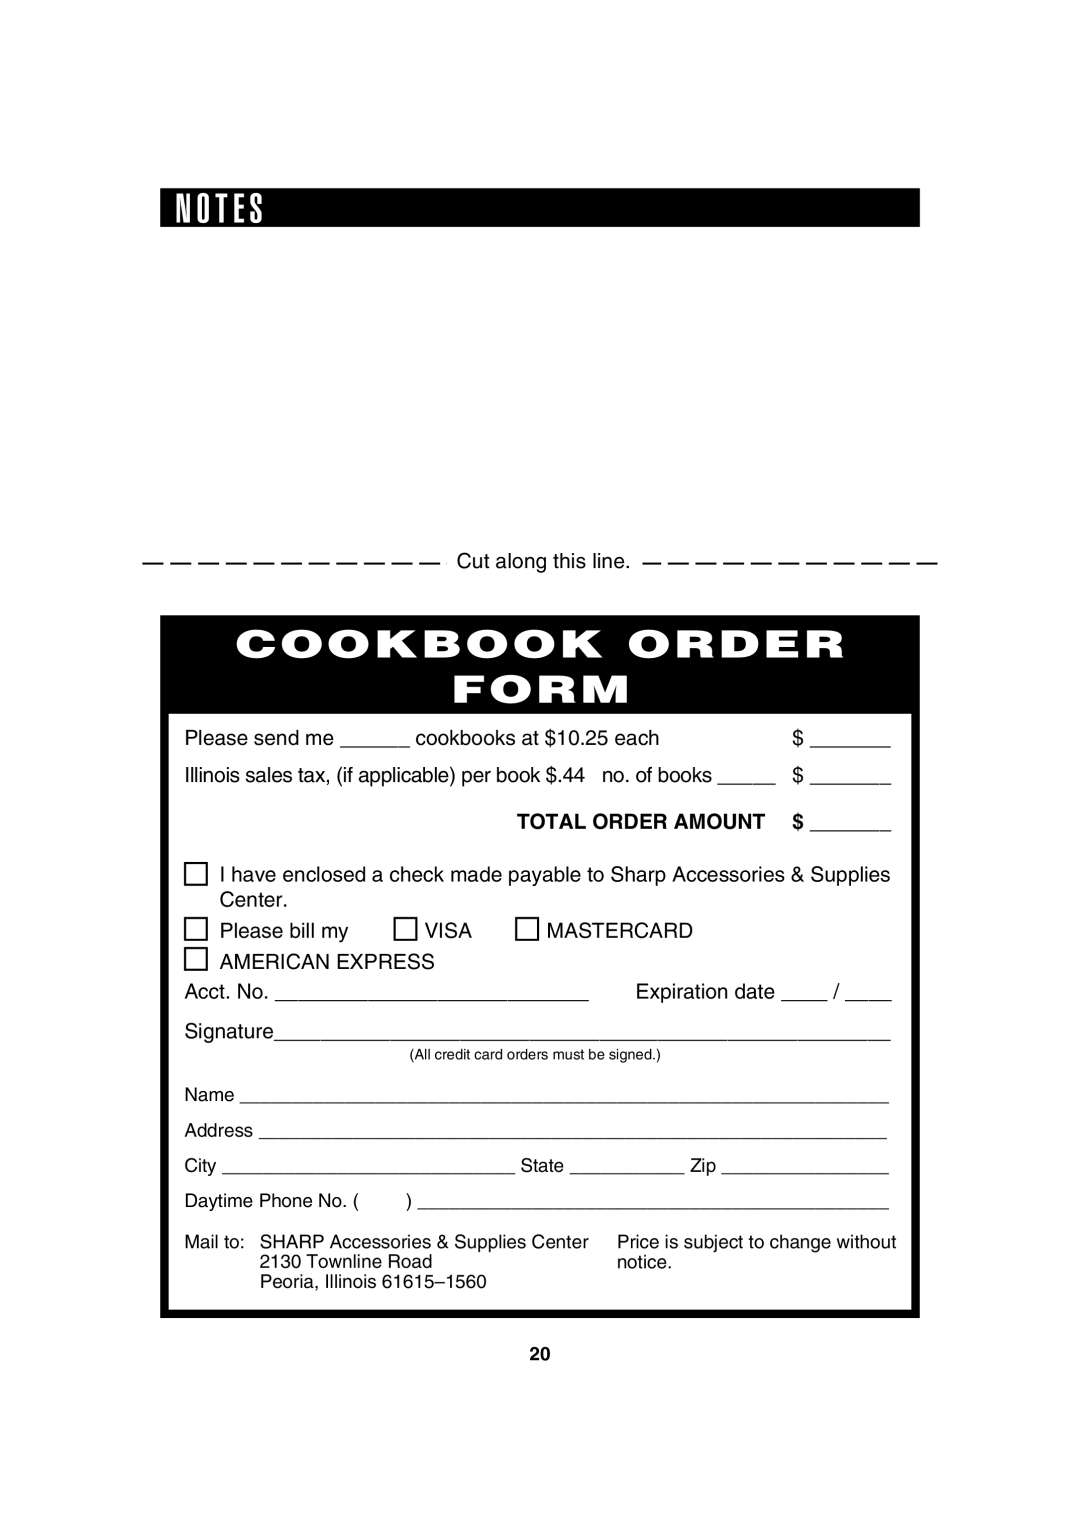 Sharp 203H, R-230H, 209H, 220H operation manual N O T E S, Cookbook Order Form Personal Recipes And Notes, Total Order Amount 